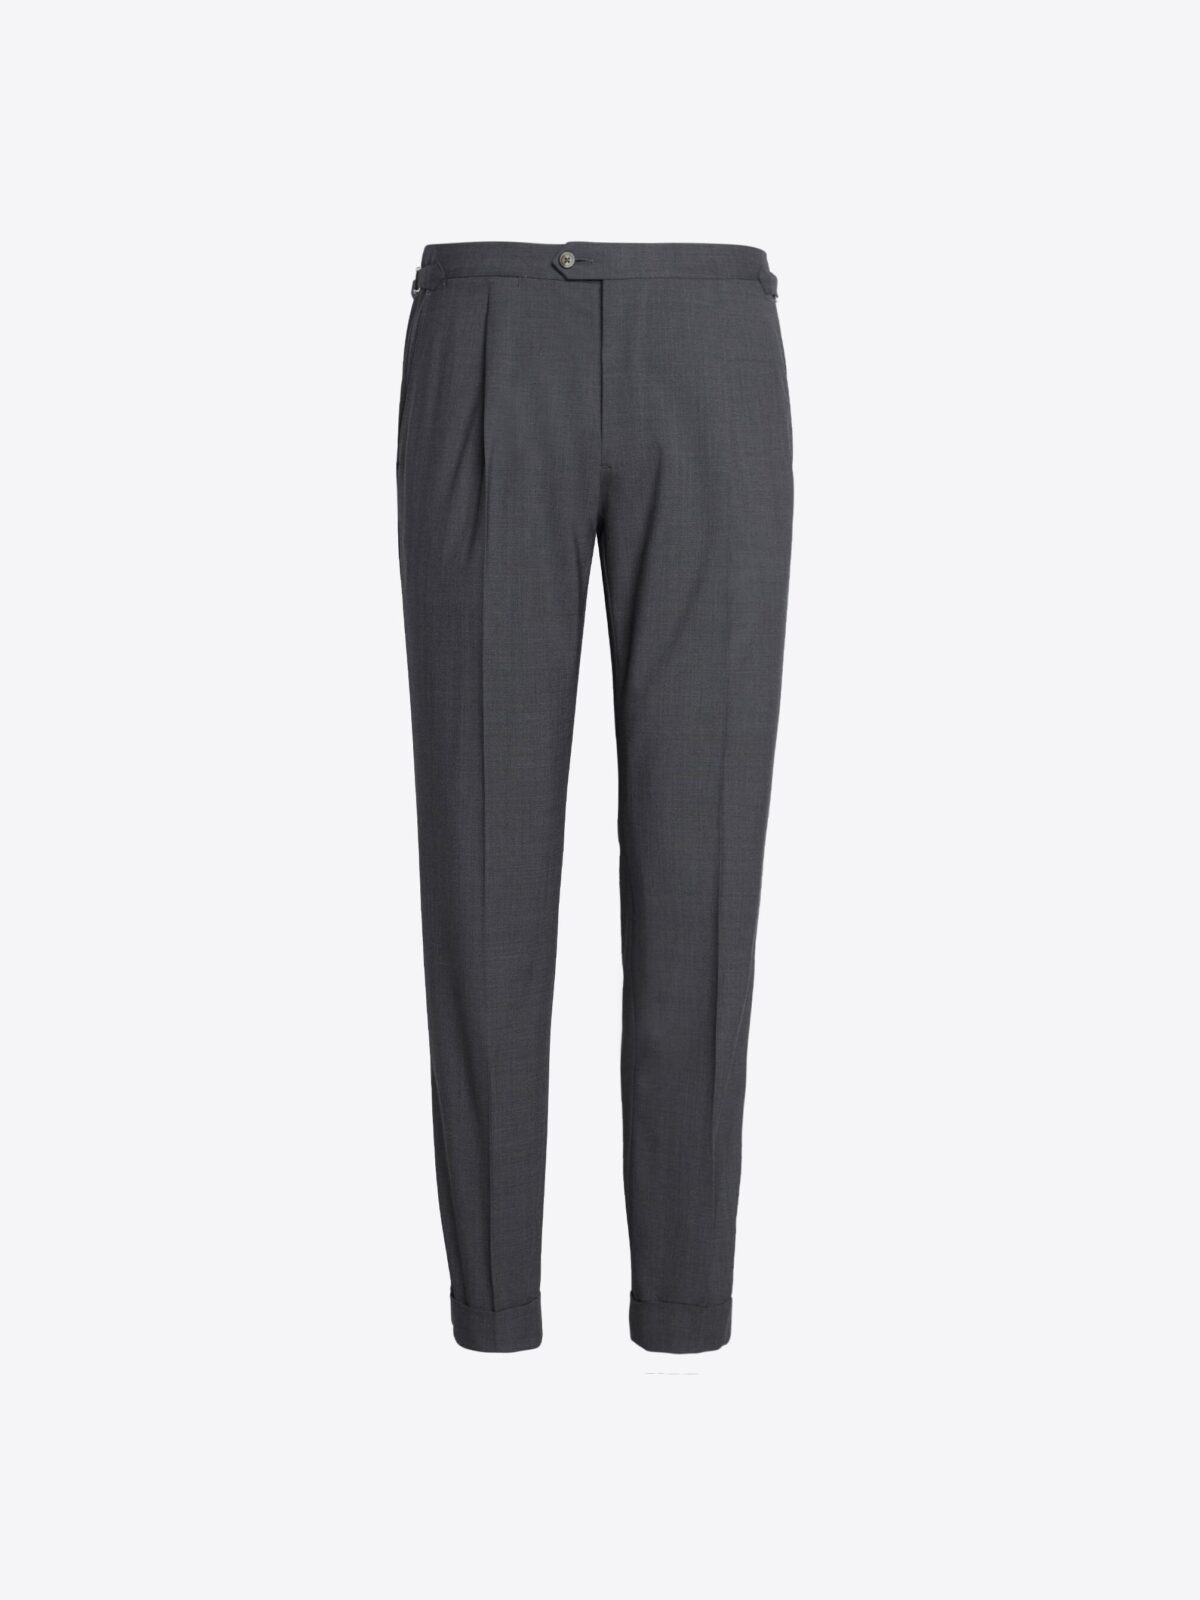 Allen Grey Stretch Wool Pleated Dress Pant - Custom Fit Tailored